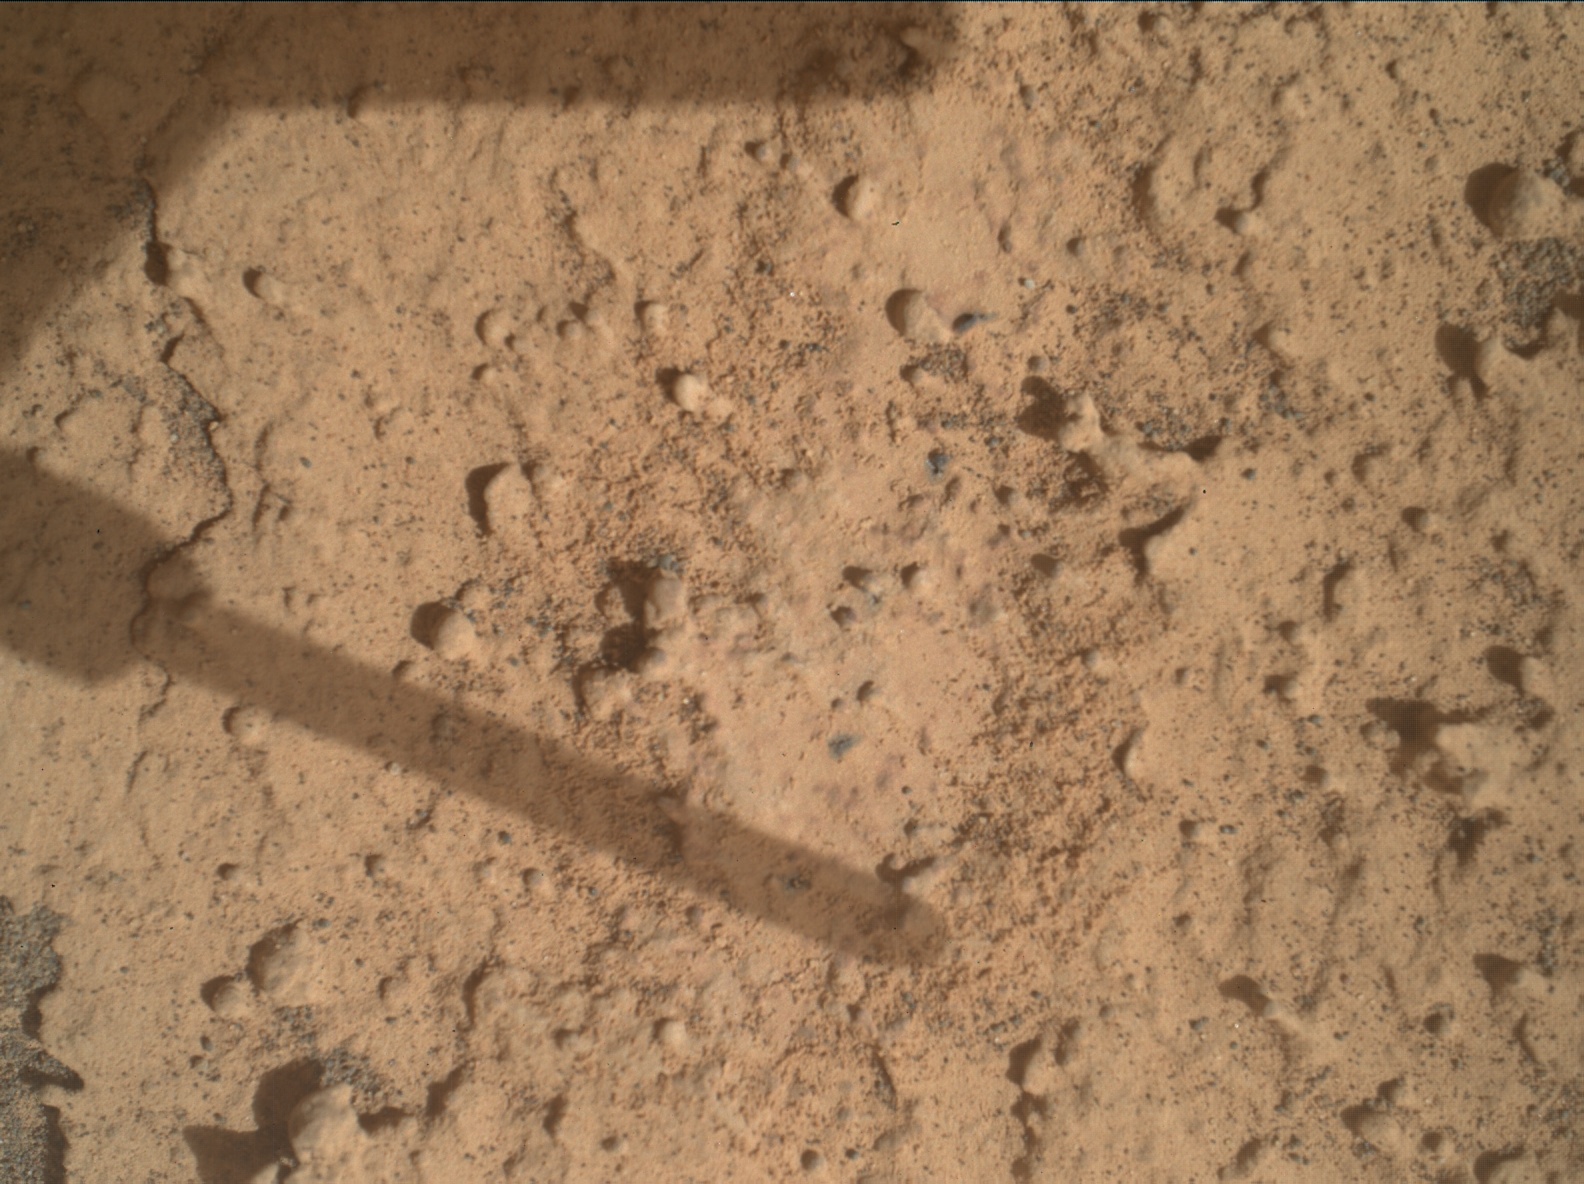 Nasa's Mars rover Curiosity acquired this image using its Mars Hand Lens Imager (MAHLI) on Sol 3537